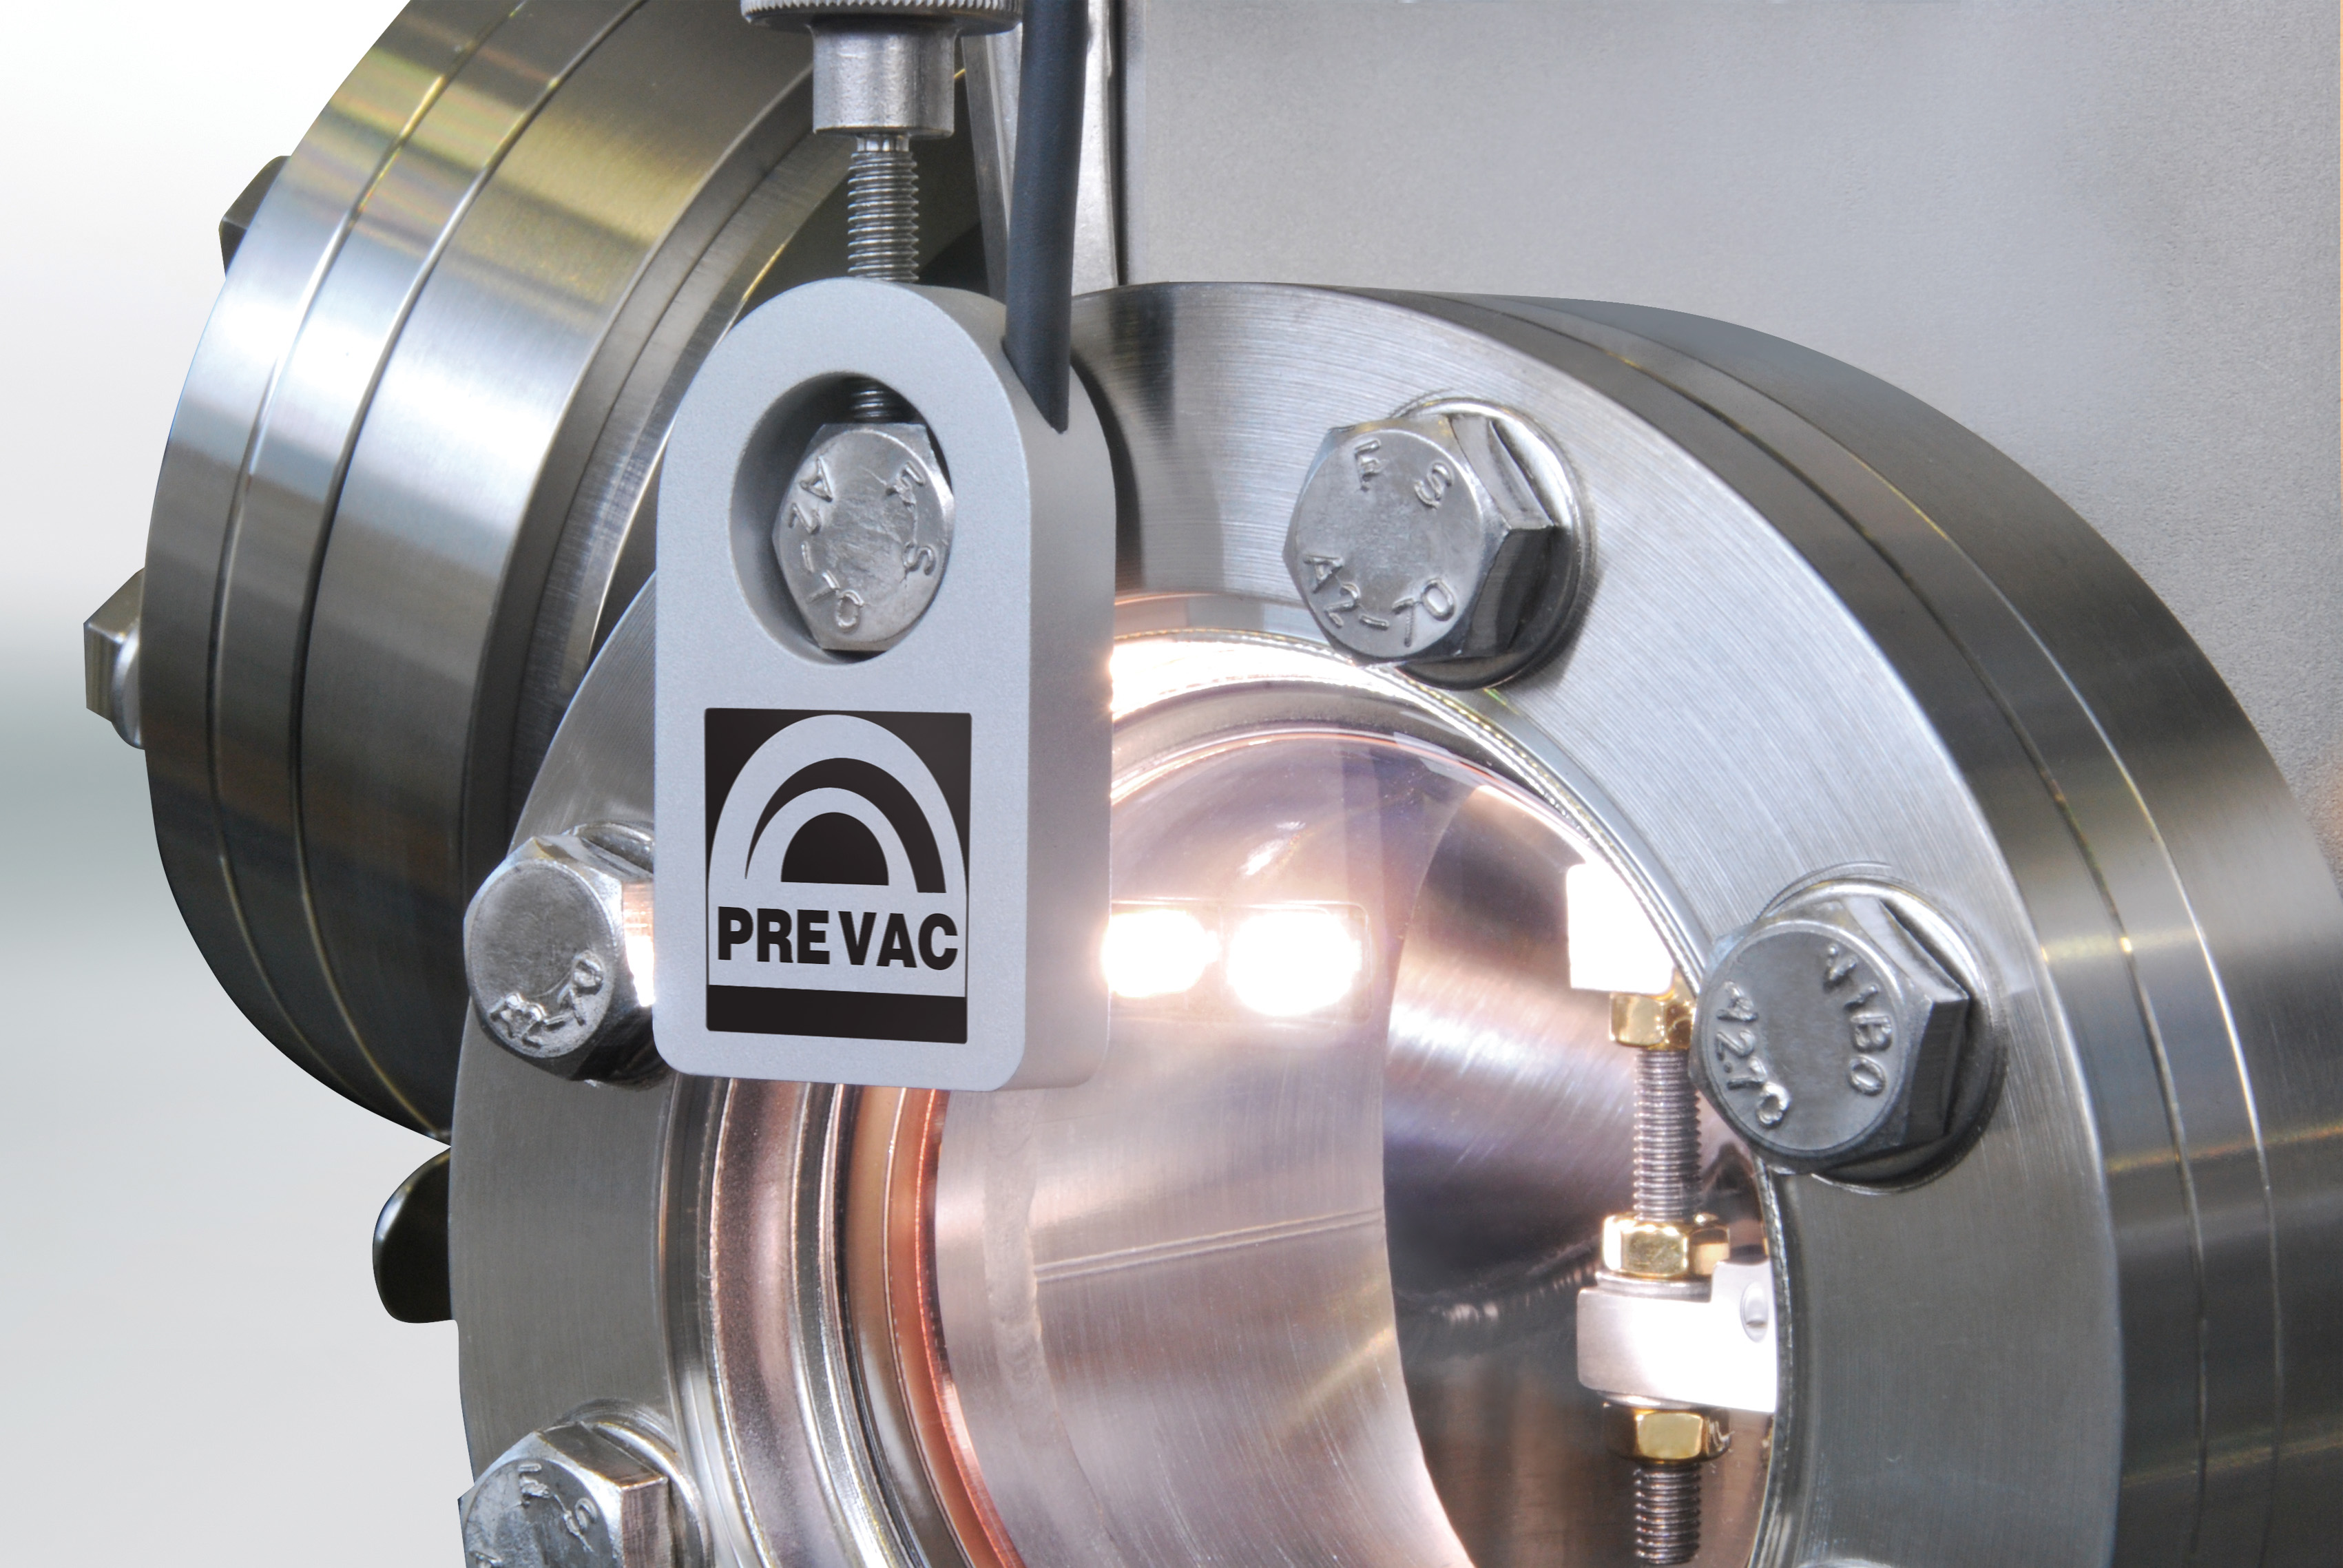 VCH 10 Vacuum Chamber Highlight led the mark of precision